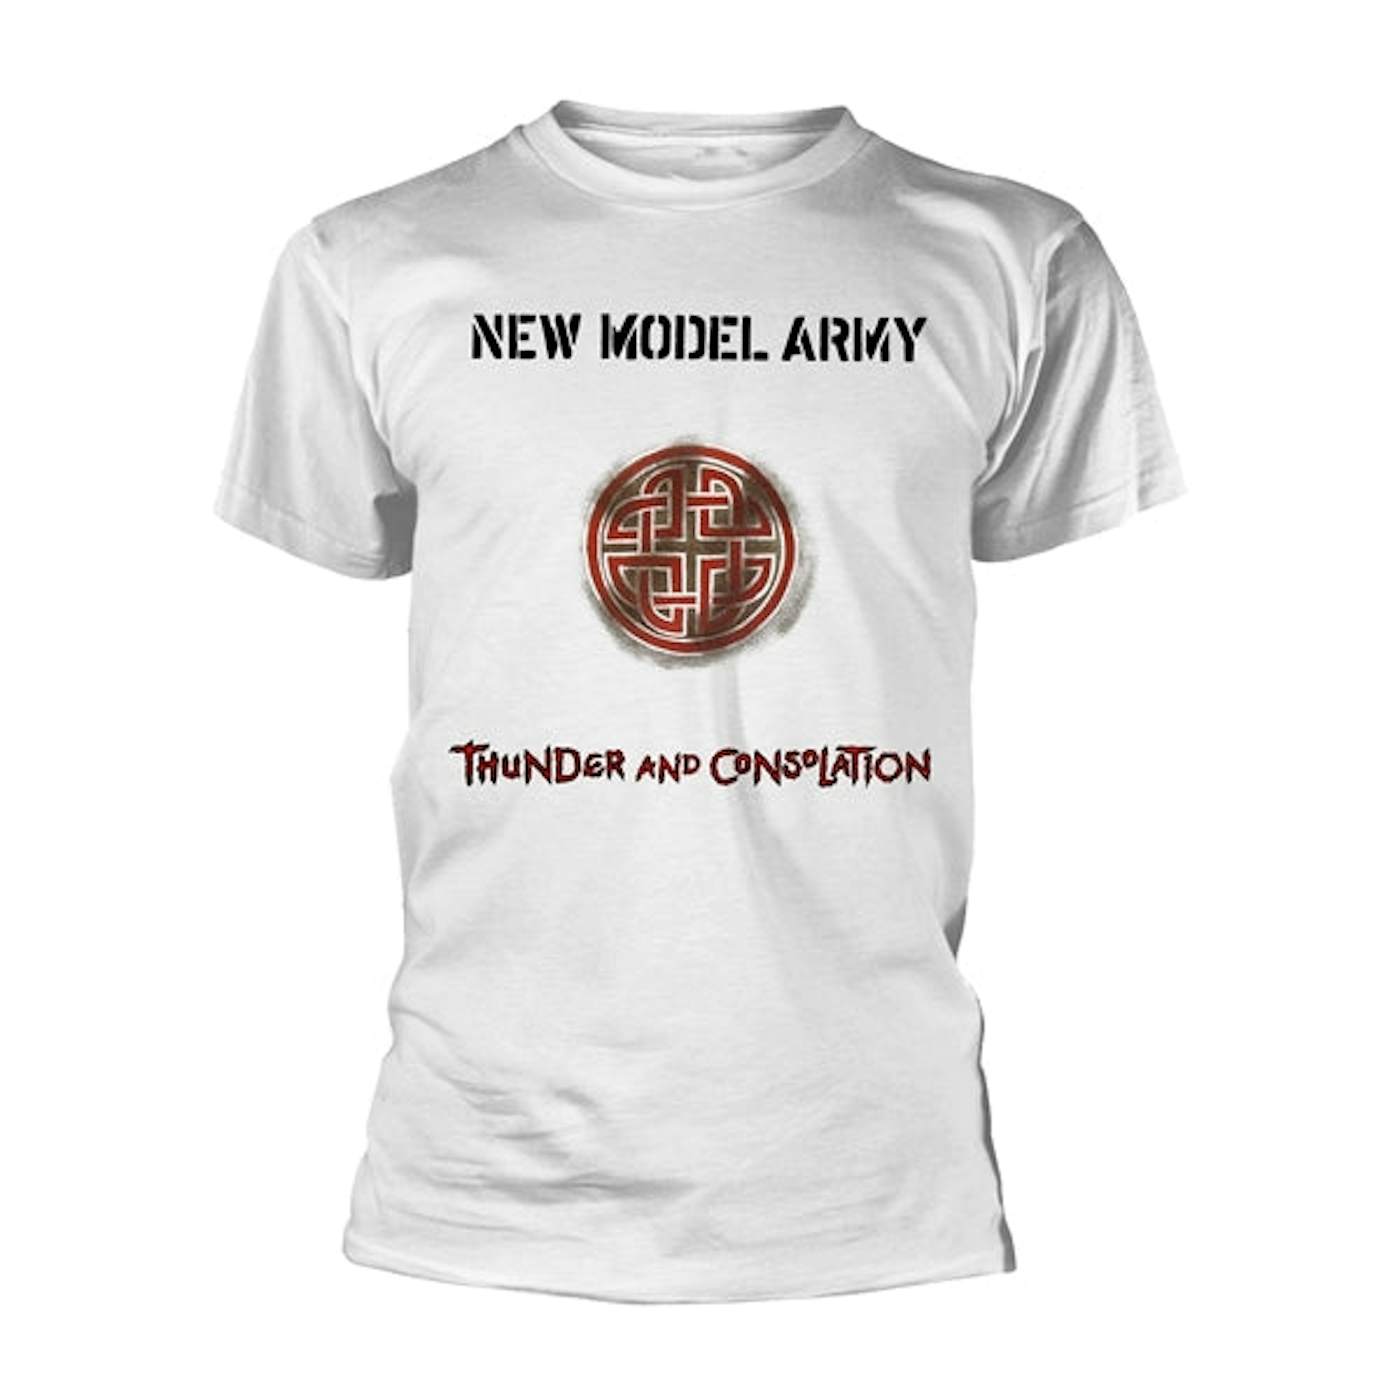 New Model Army T Shirt - Thunder And Consolation (White)